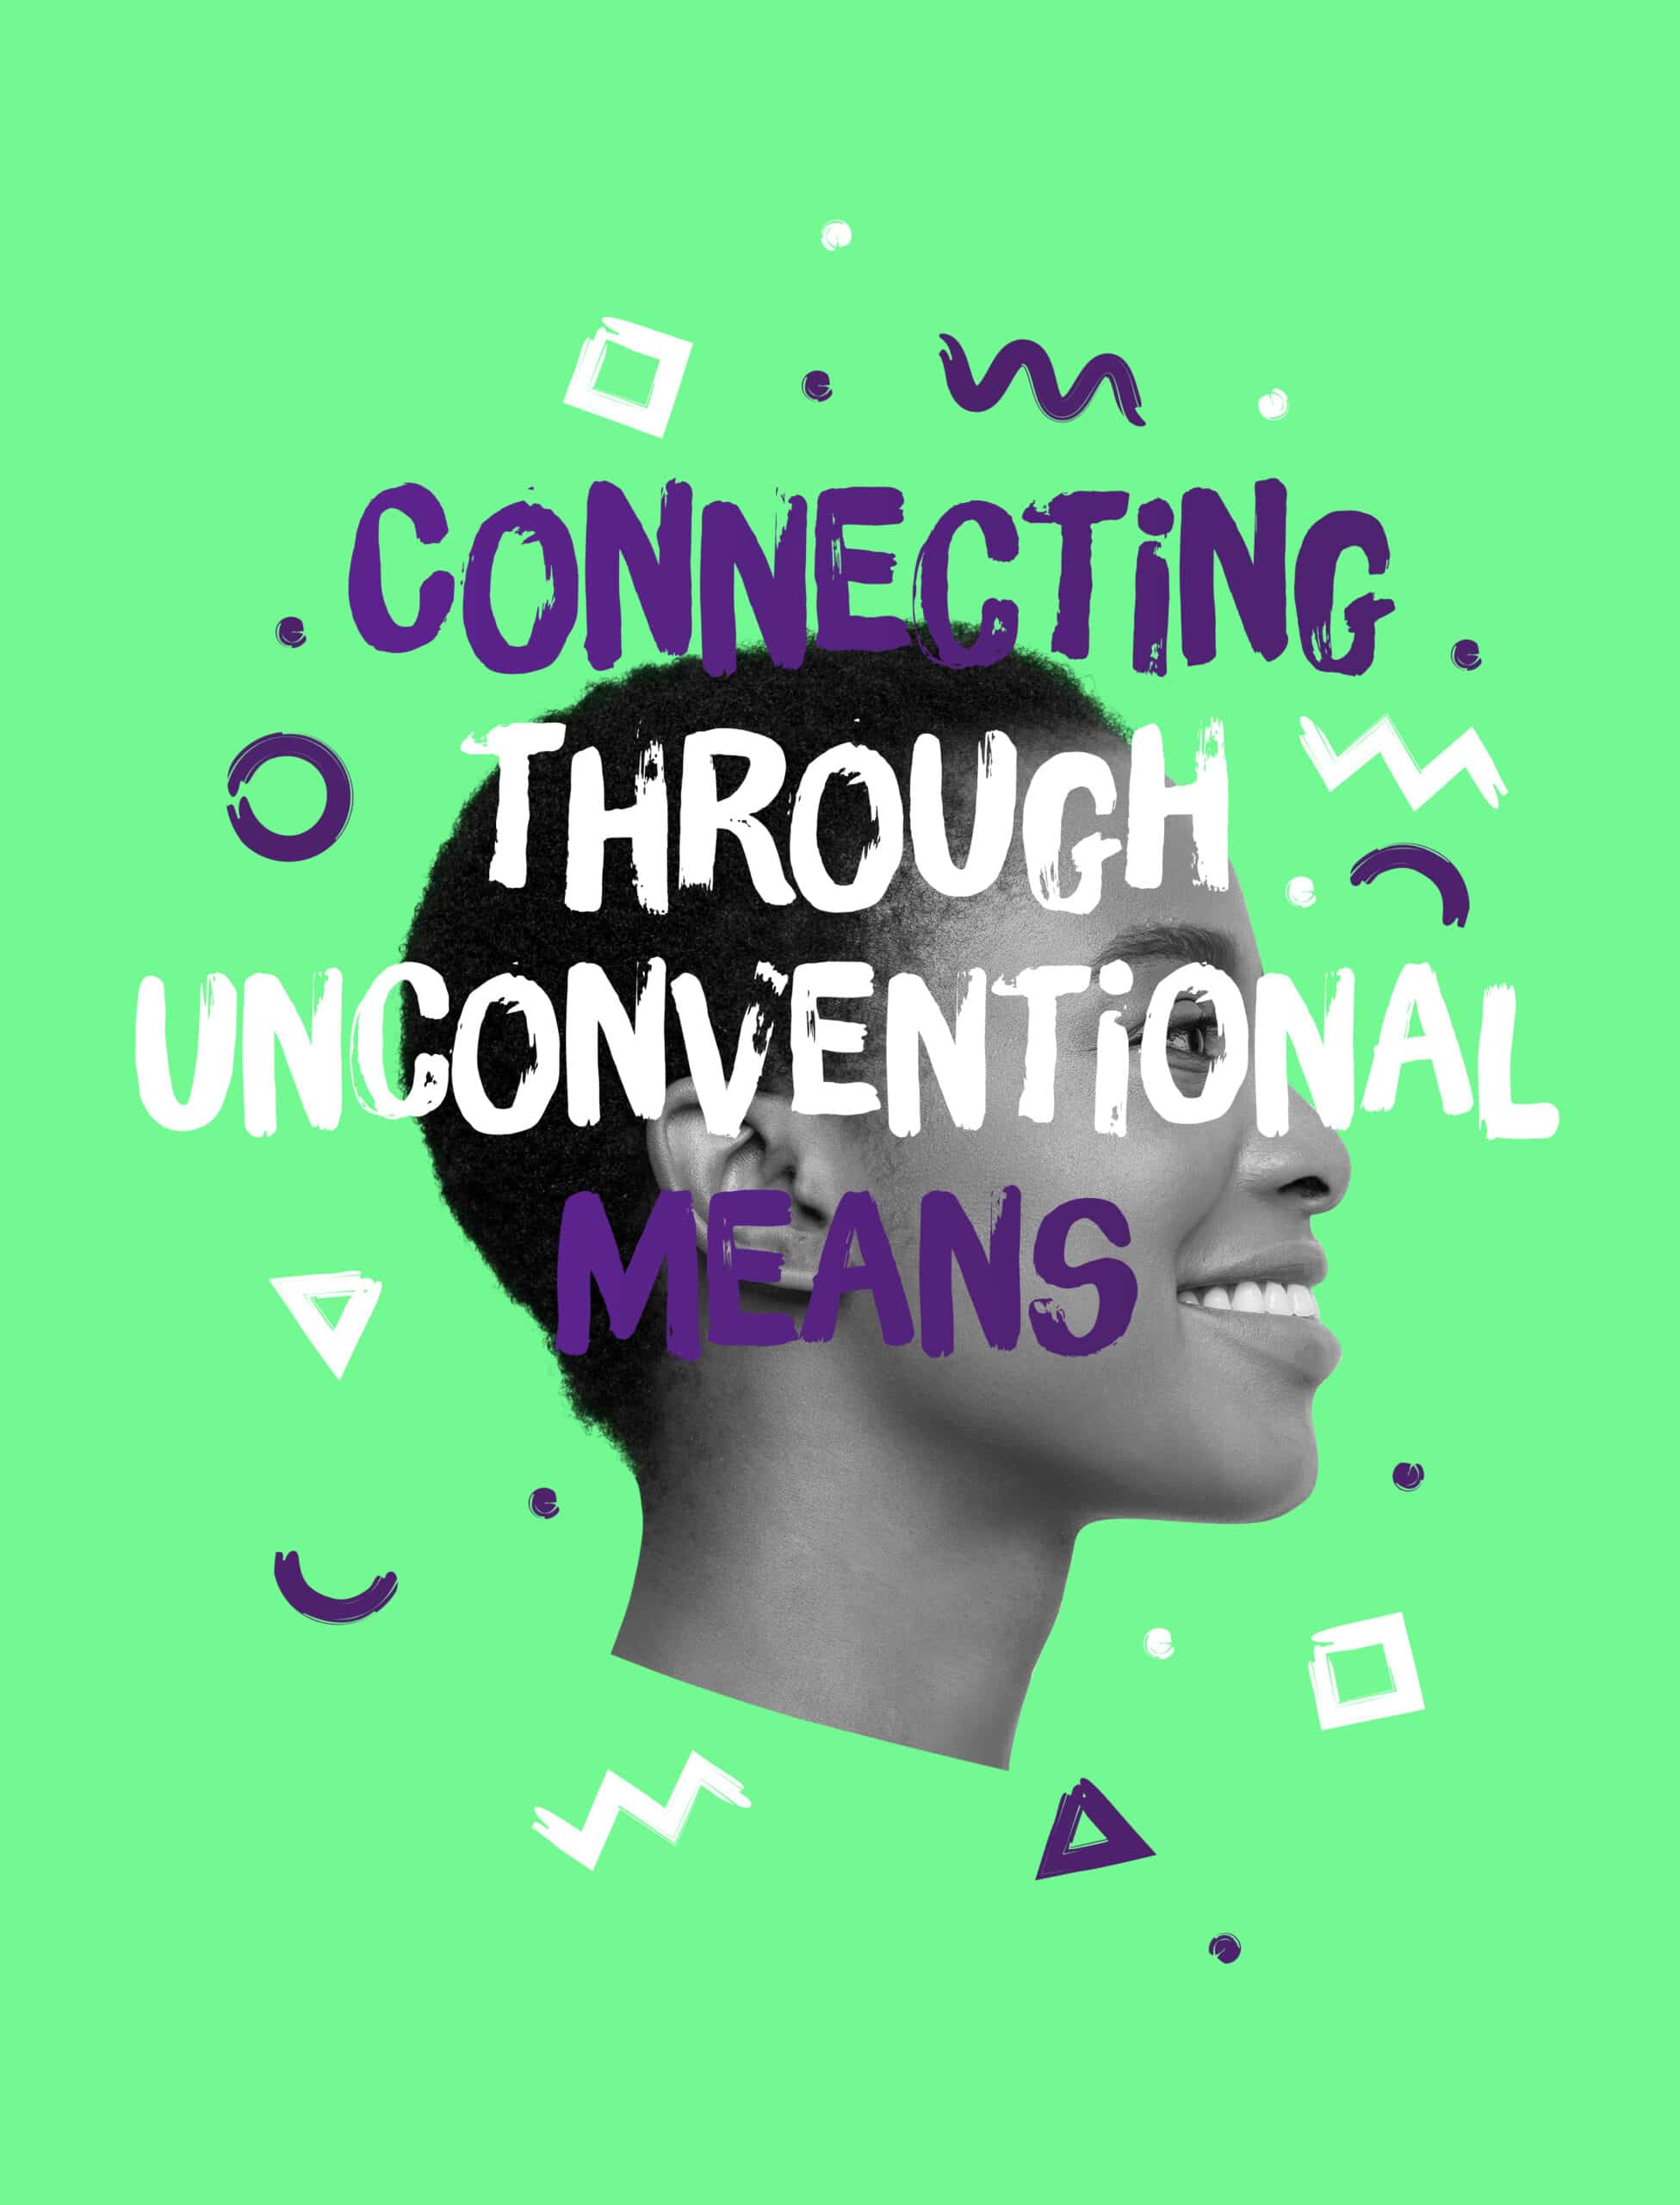 connecting-through-unconventional-means-header-image